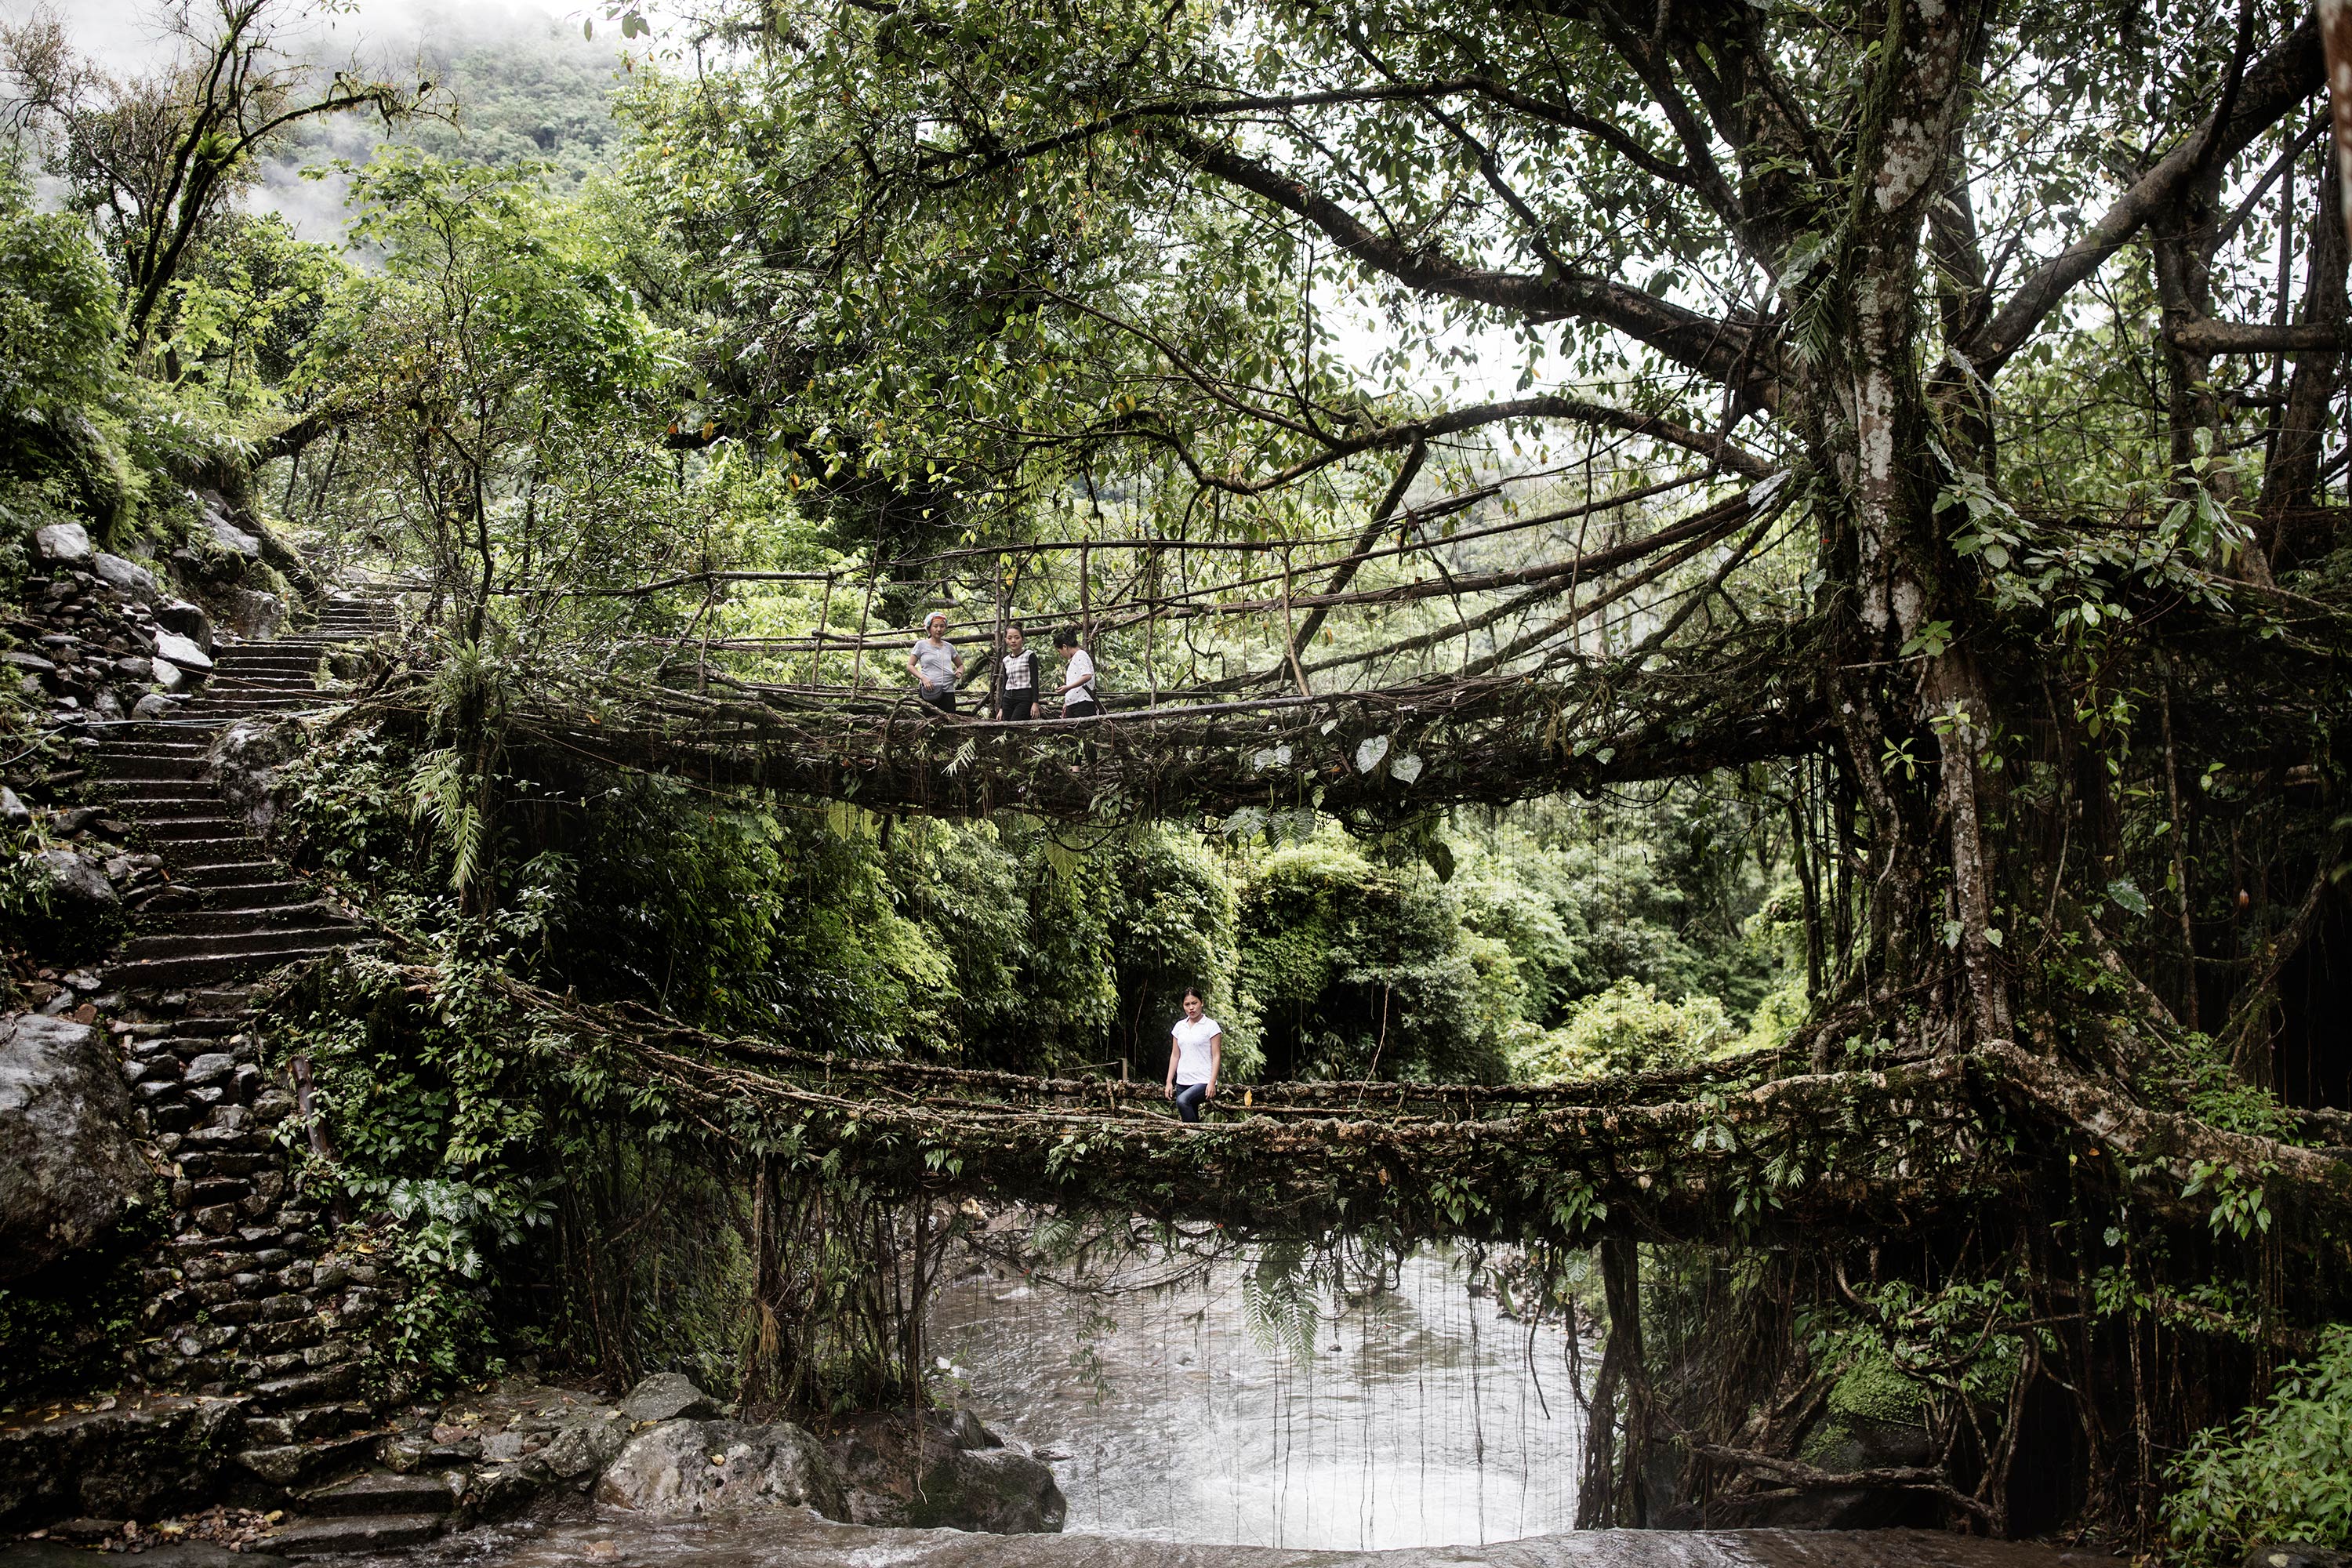 Picture of Living Root Bridges in Meghalaya, India